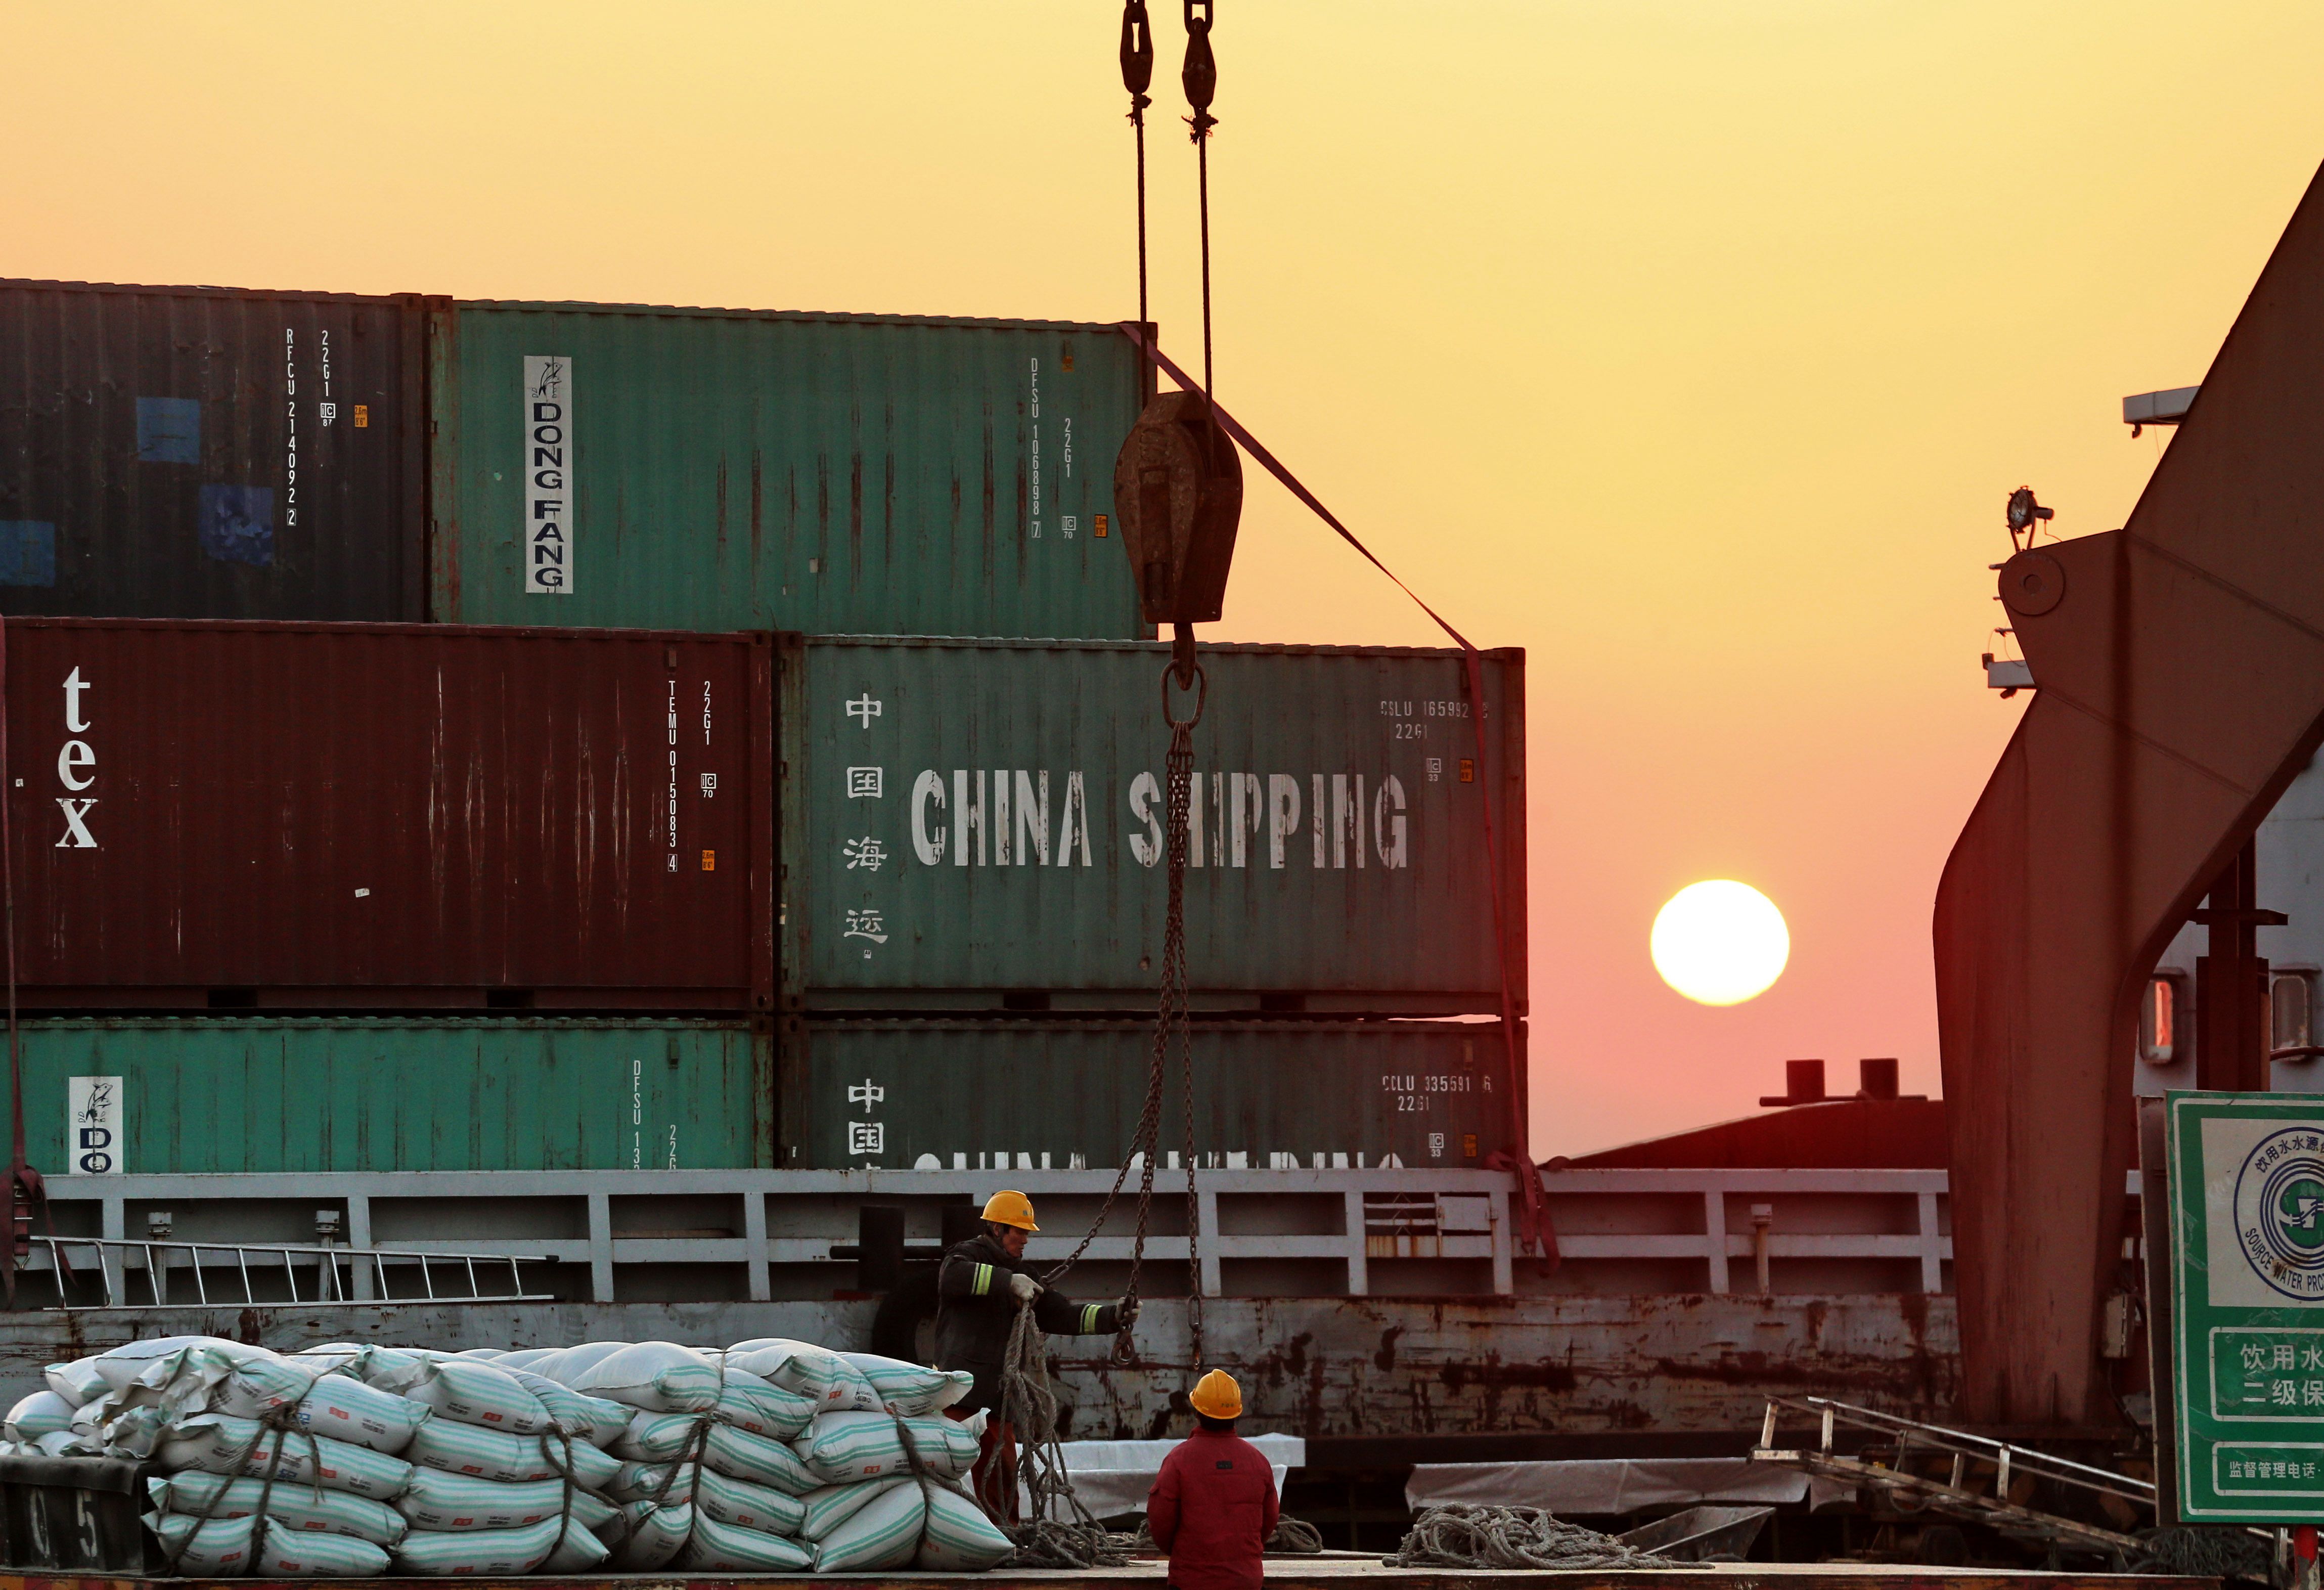 Workers loading ships at a port in Nantong, in China's eastern Jiangsu province, on March 9, 2018. (AFP/Getty Images)